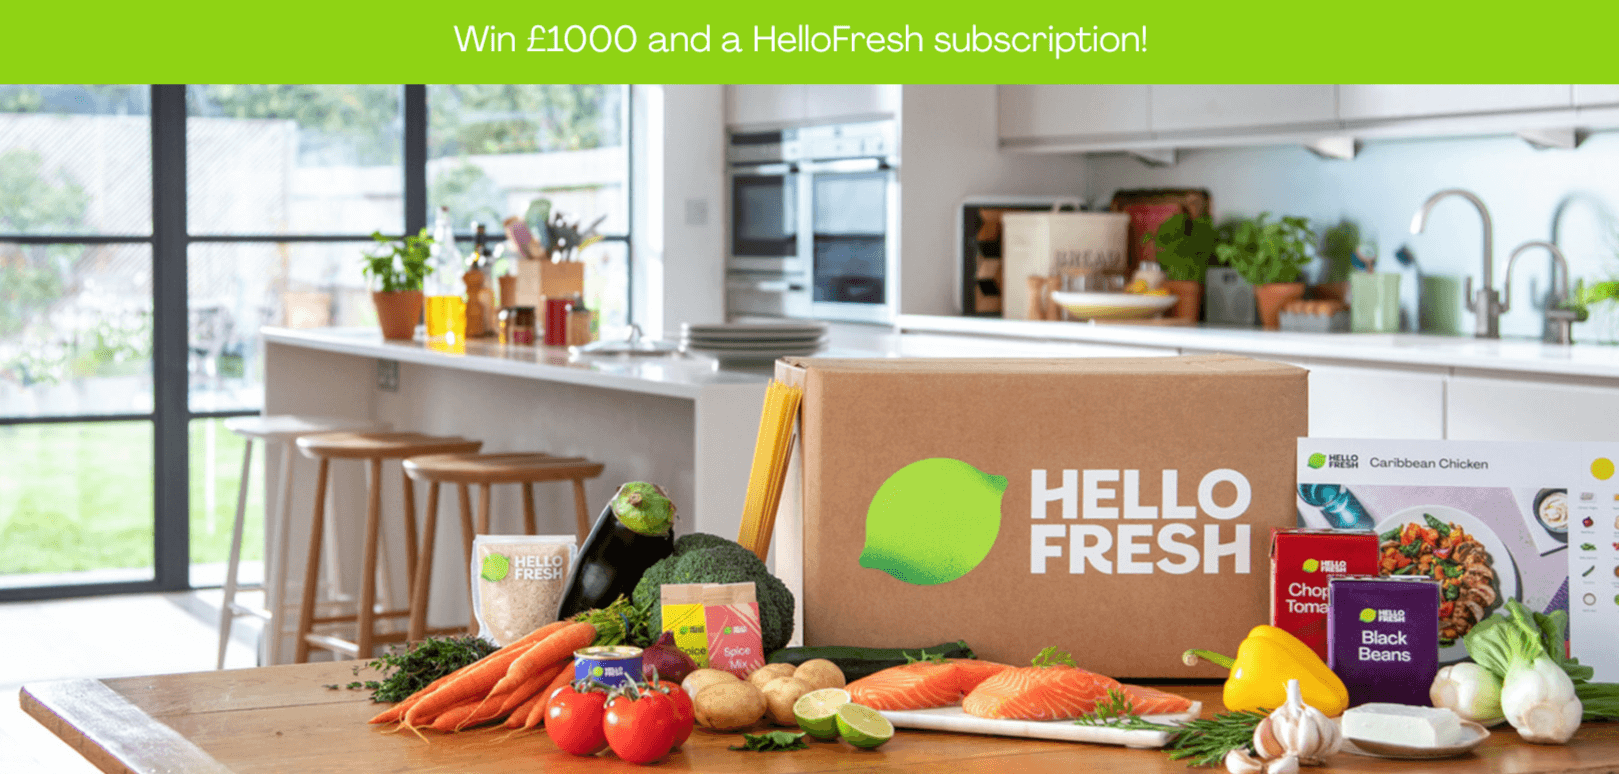 Win £1,000 cash and a HelloFresh subscription with Hits Radio